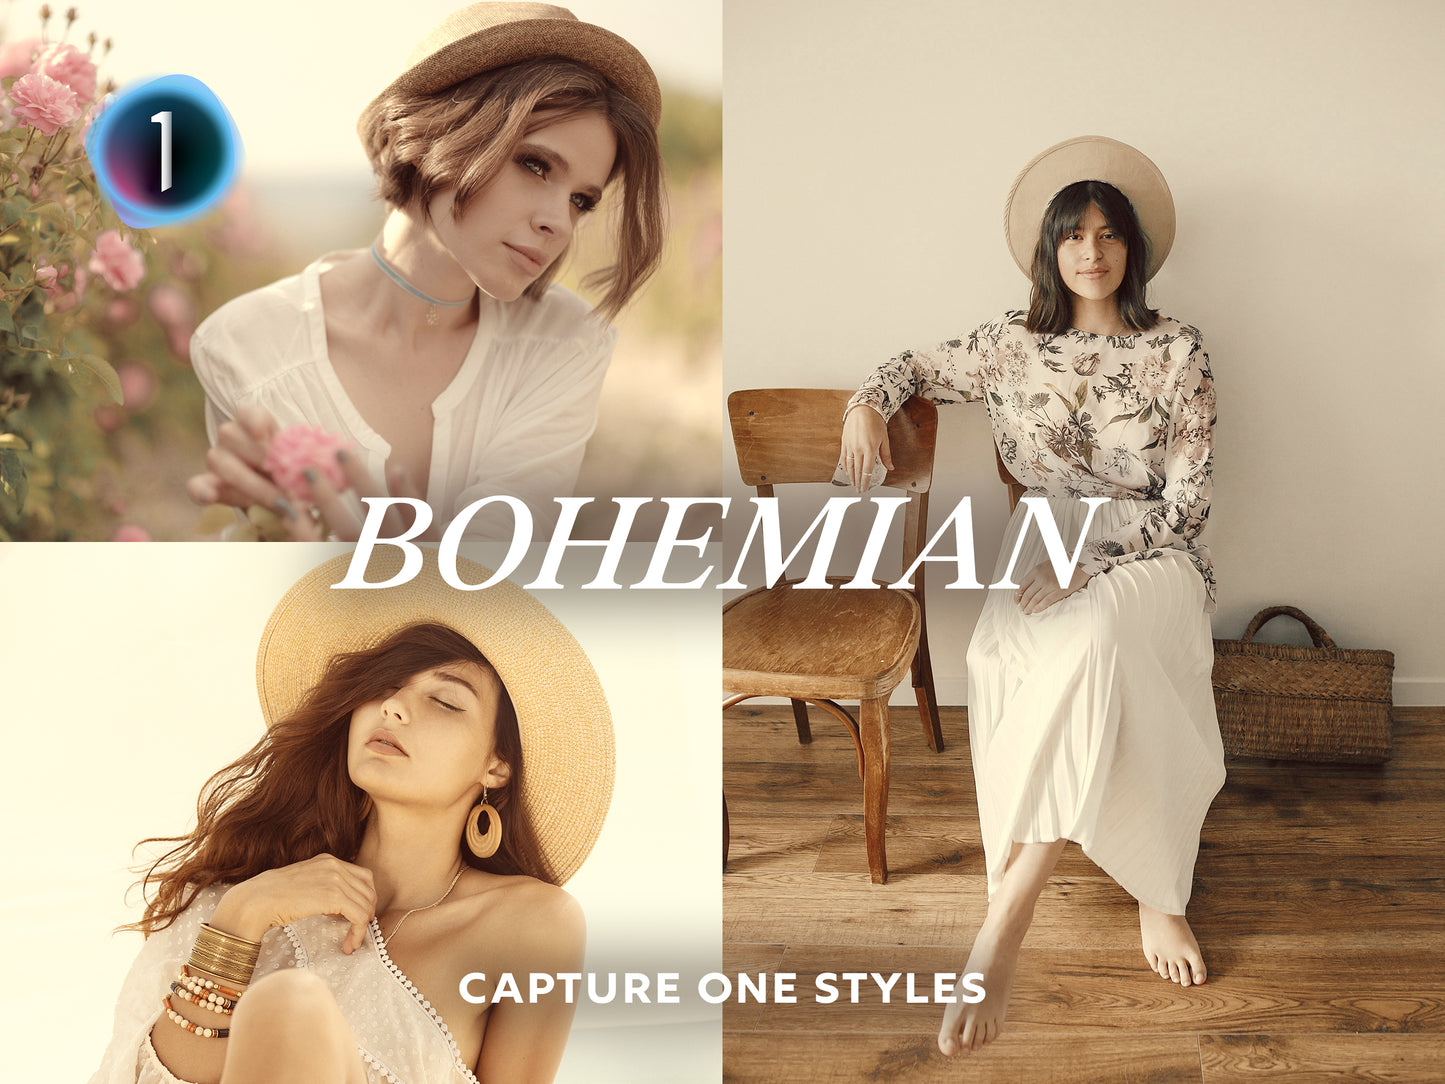 Bohemian Capture One Styles